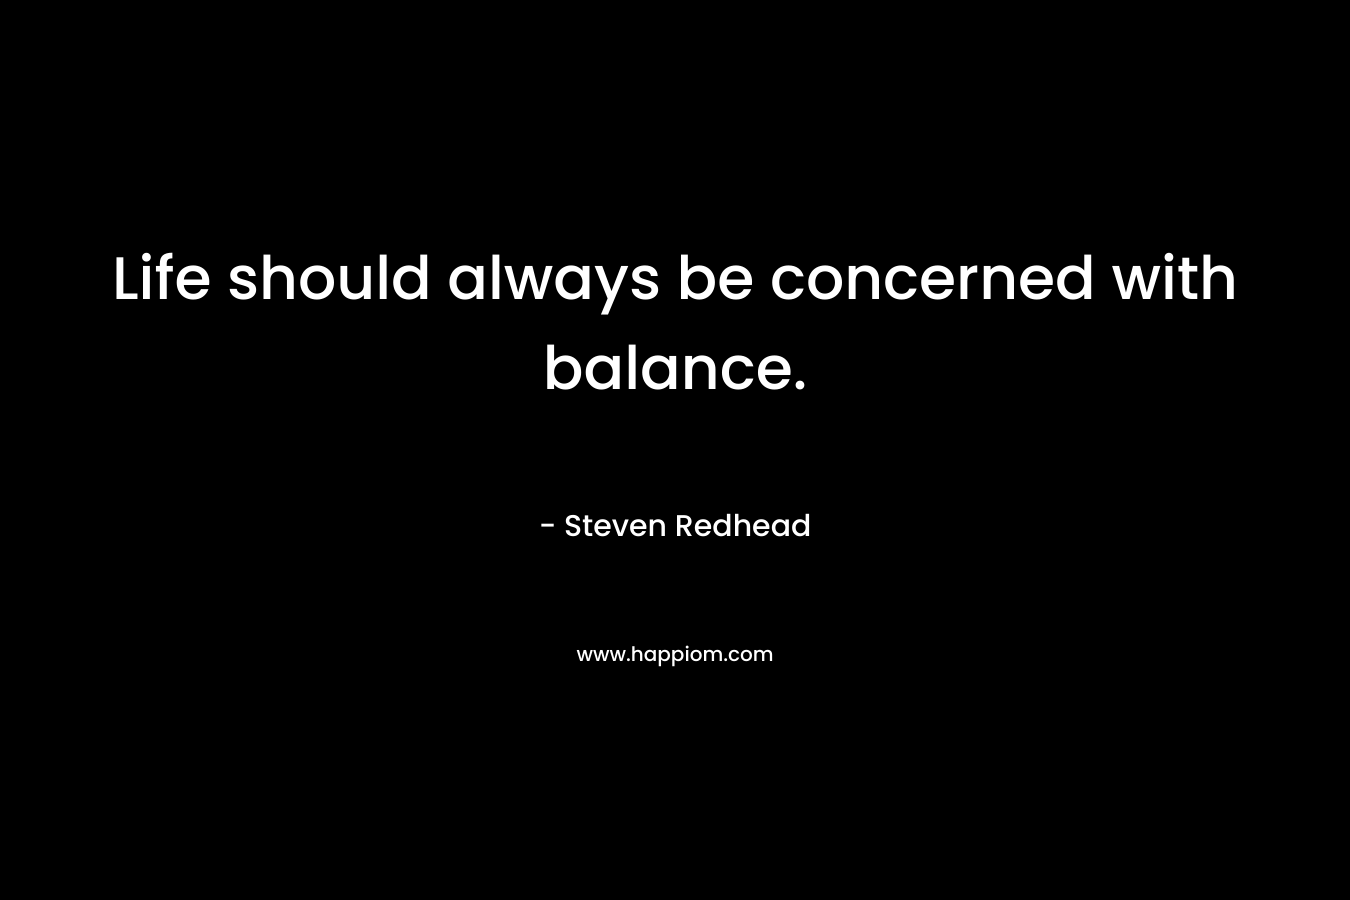 Life should always be concerned with balance.